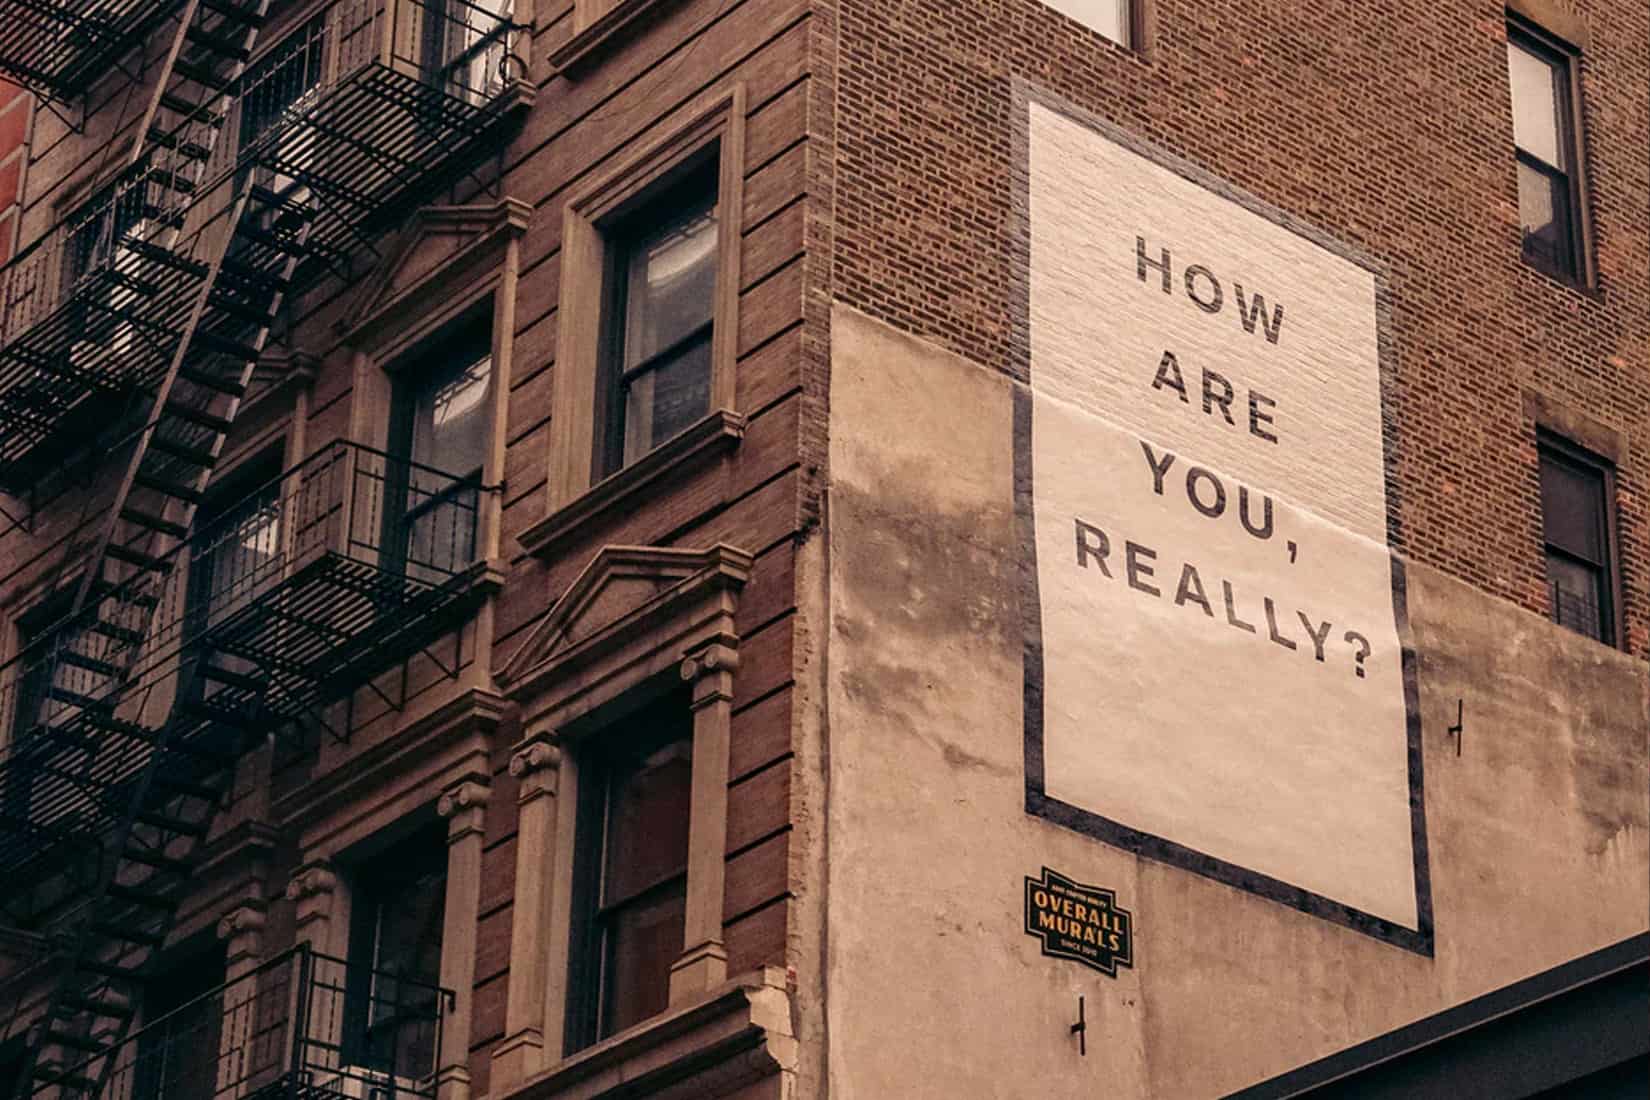 Wall with a sign that asks 'How are you, really?'